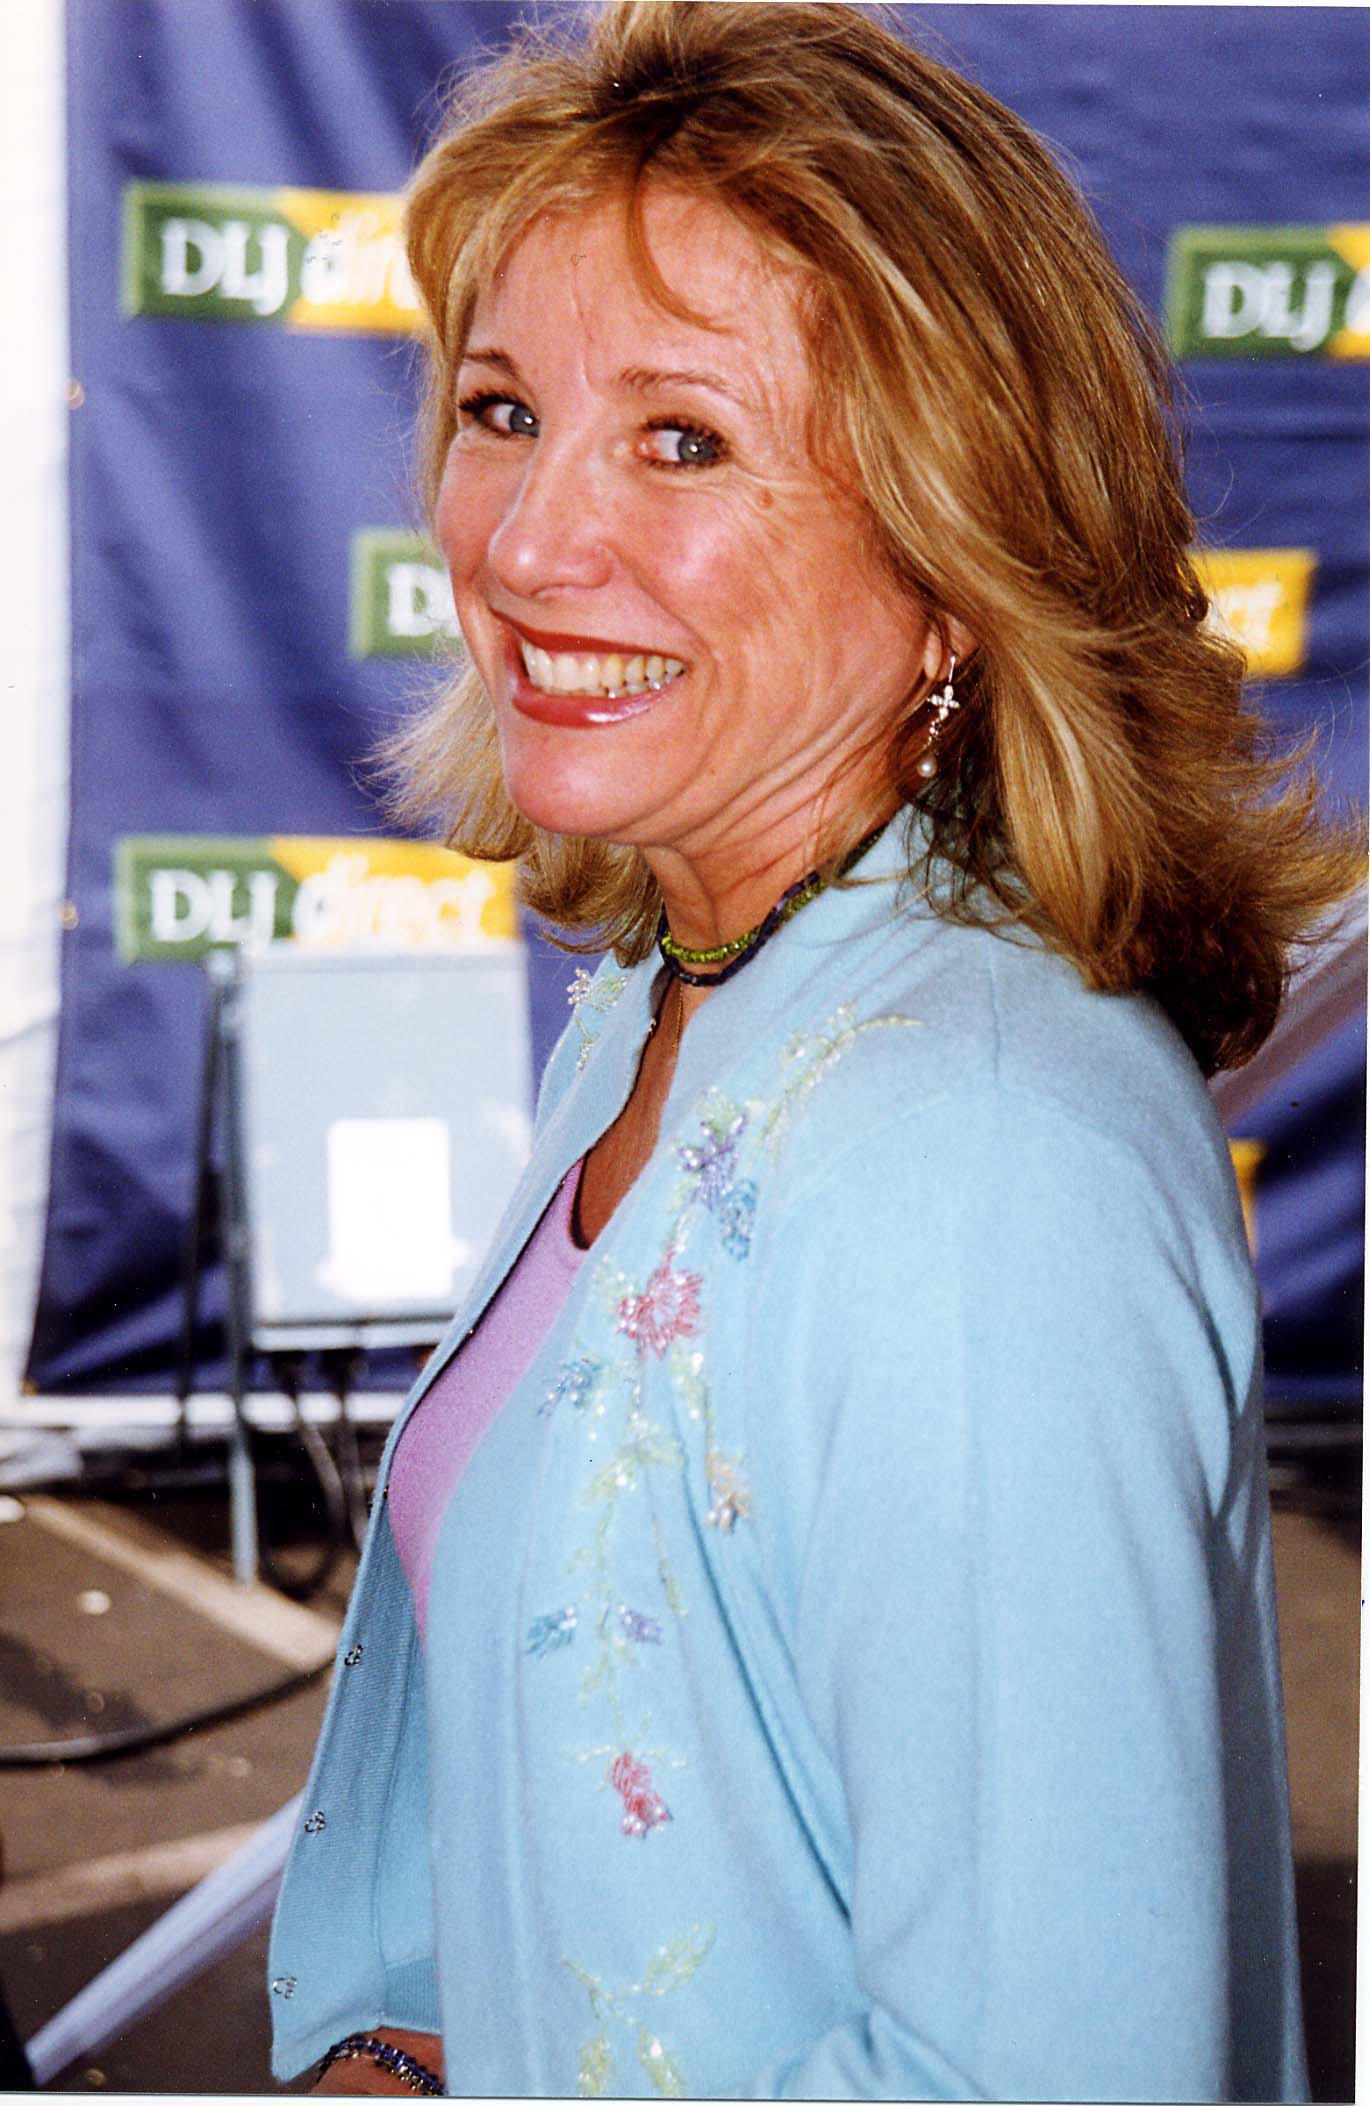 Teri Garr during the Independent Spirit Awards in Santa Monica, California on March 23, 2000. | Source: Getty Images